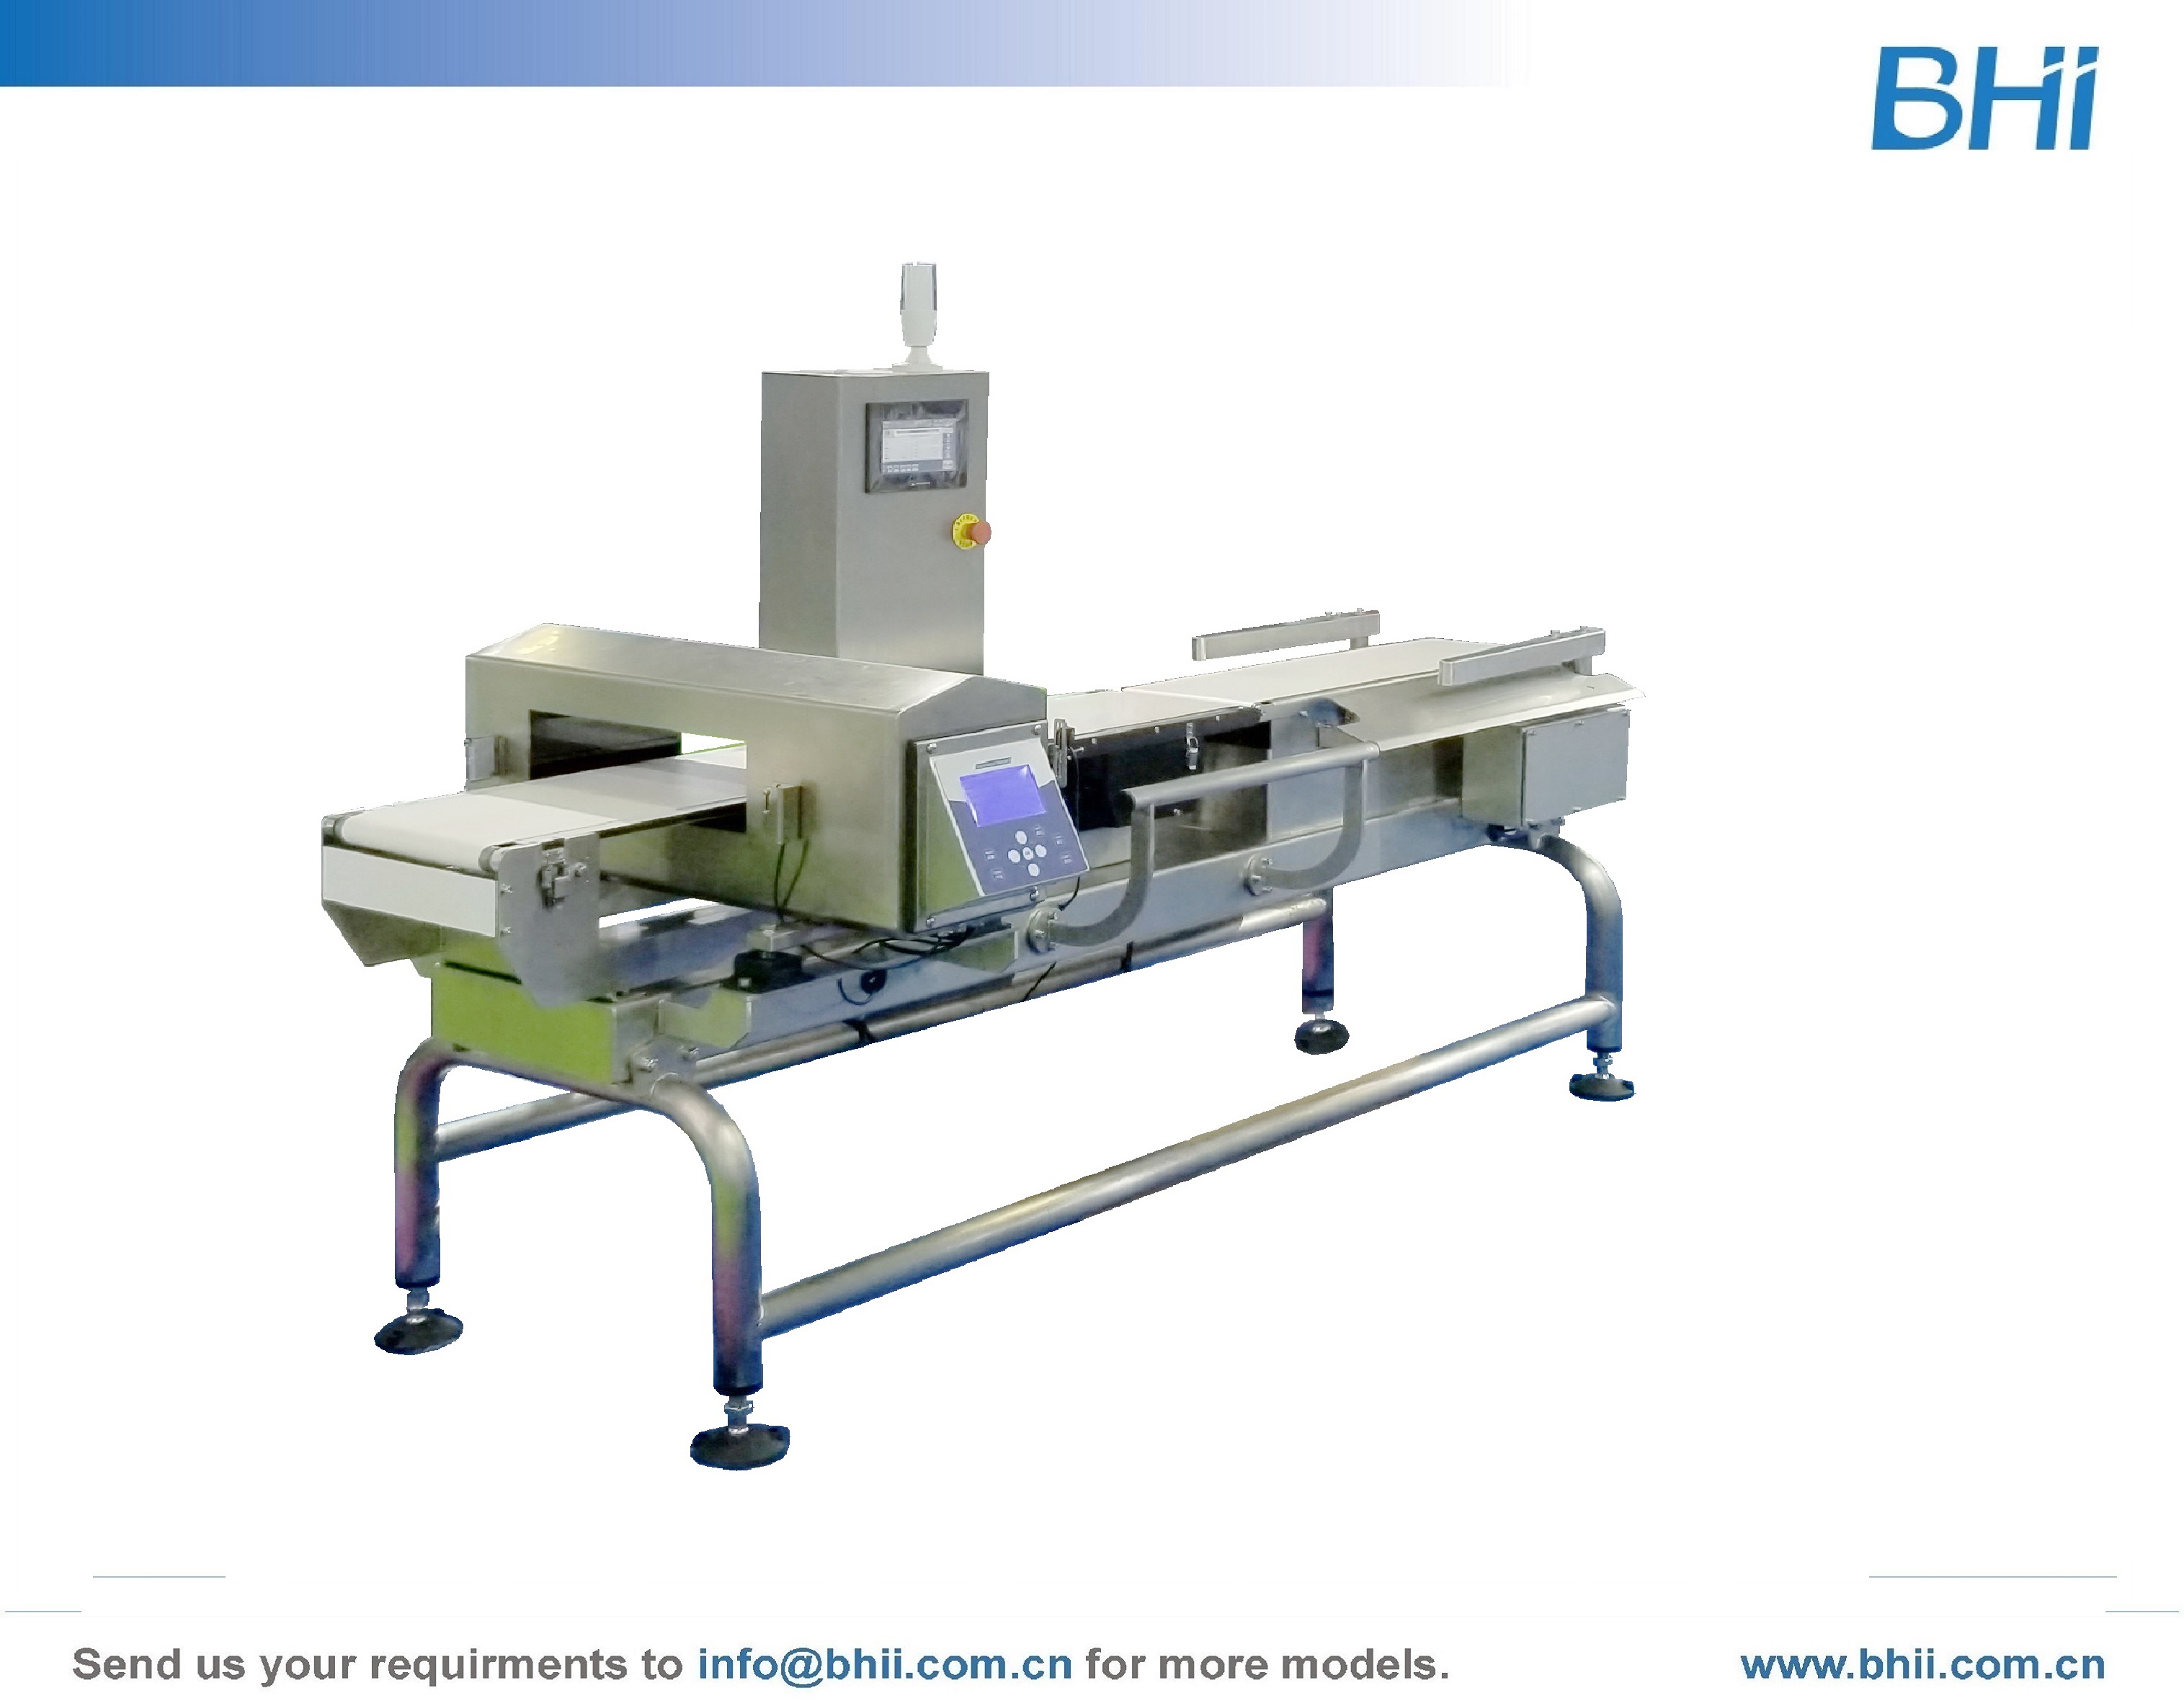 Combi - Metal Detector with Checkweigher (Economy) 